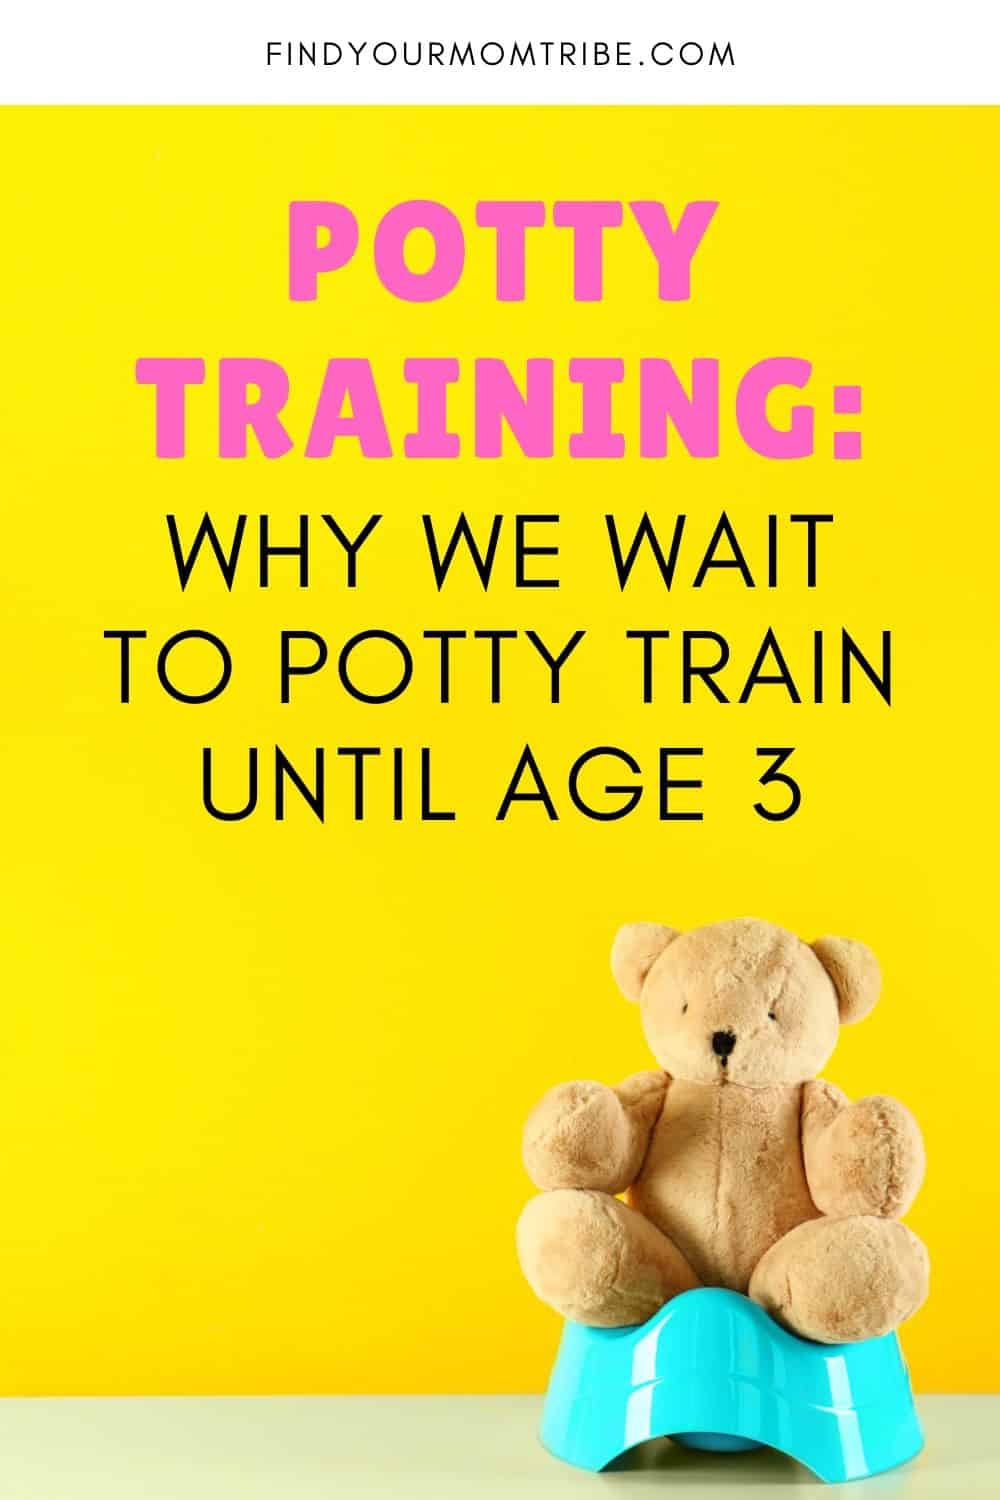 Why We Wait to Potty Train Until Age 3